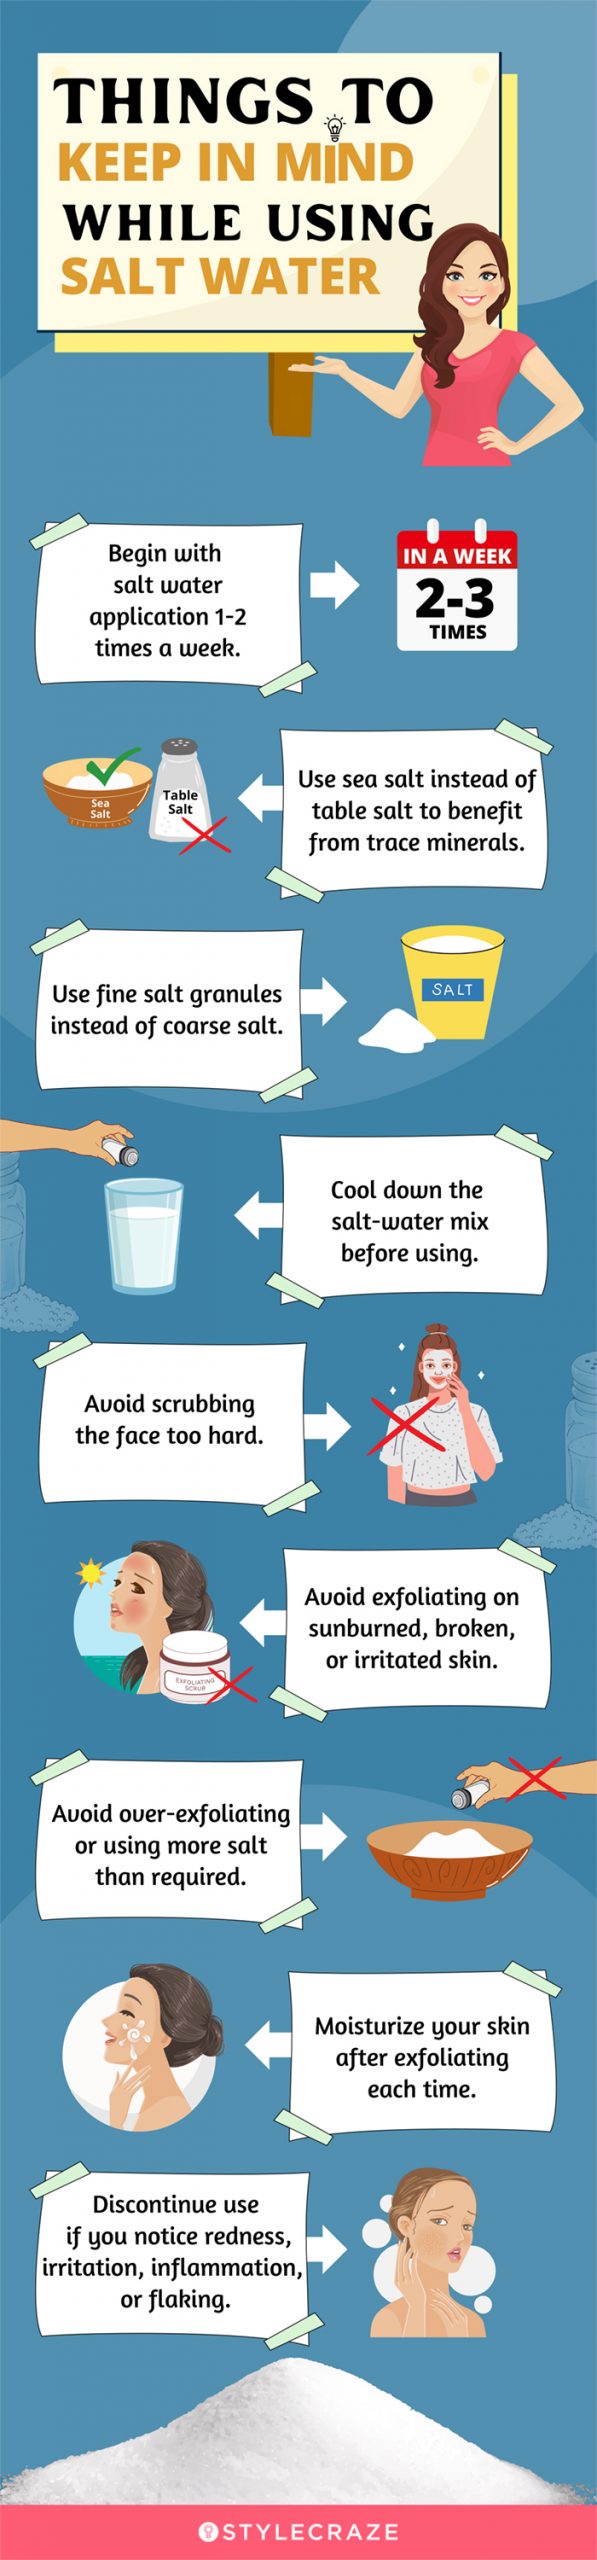 things to keep in mind while using salt water [infographic]